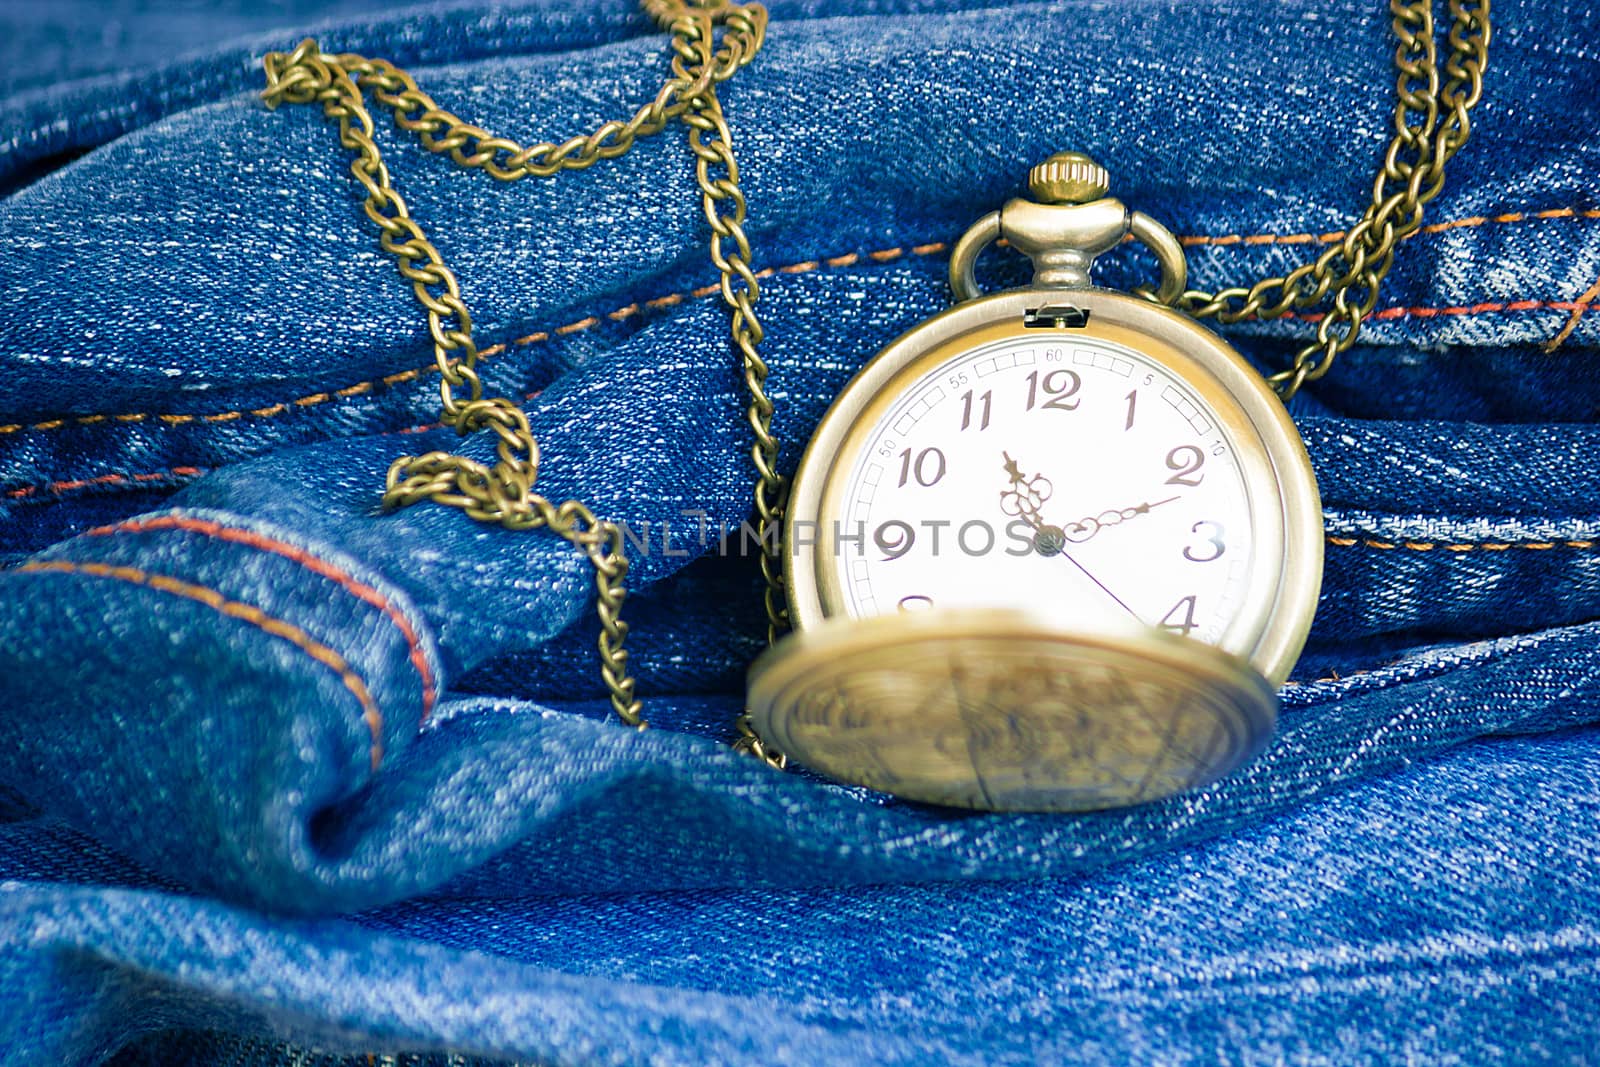 Image Of Blue Jeans Denim Texture And Vintage Pocket Watch by rakoptonLPN